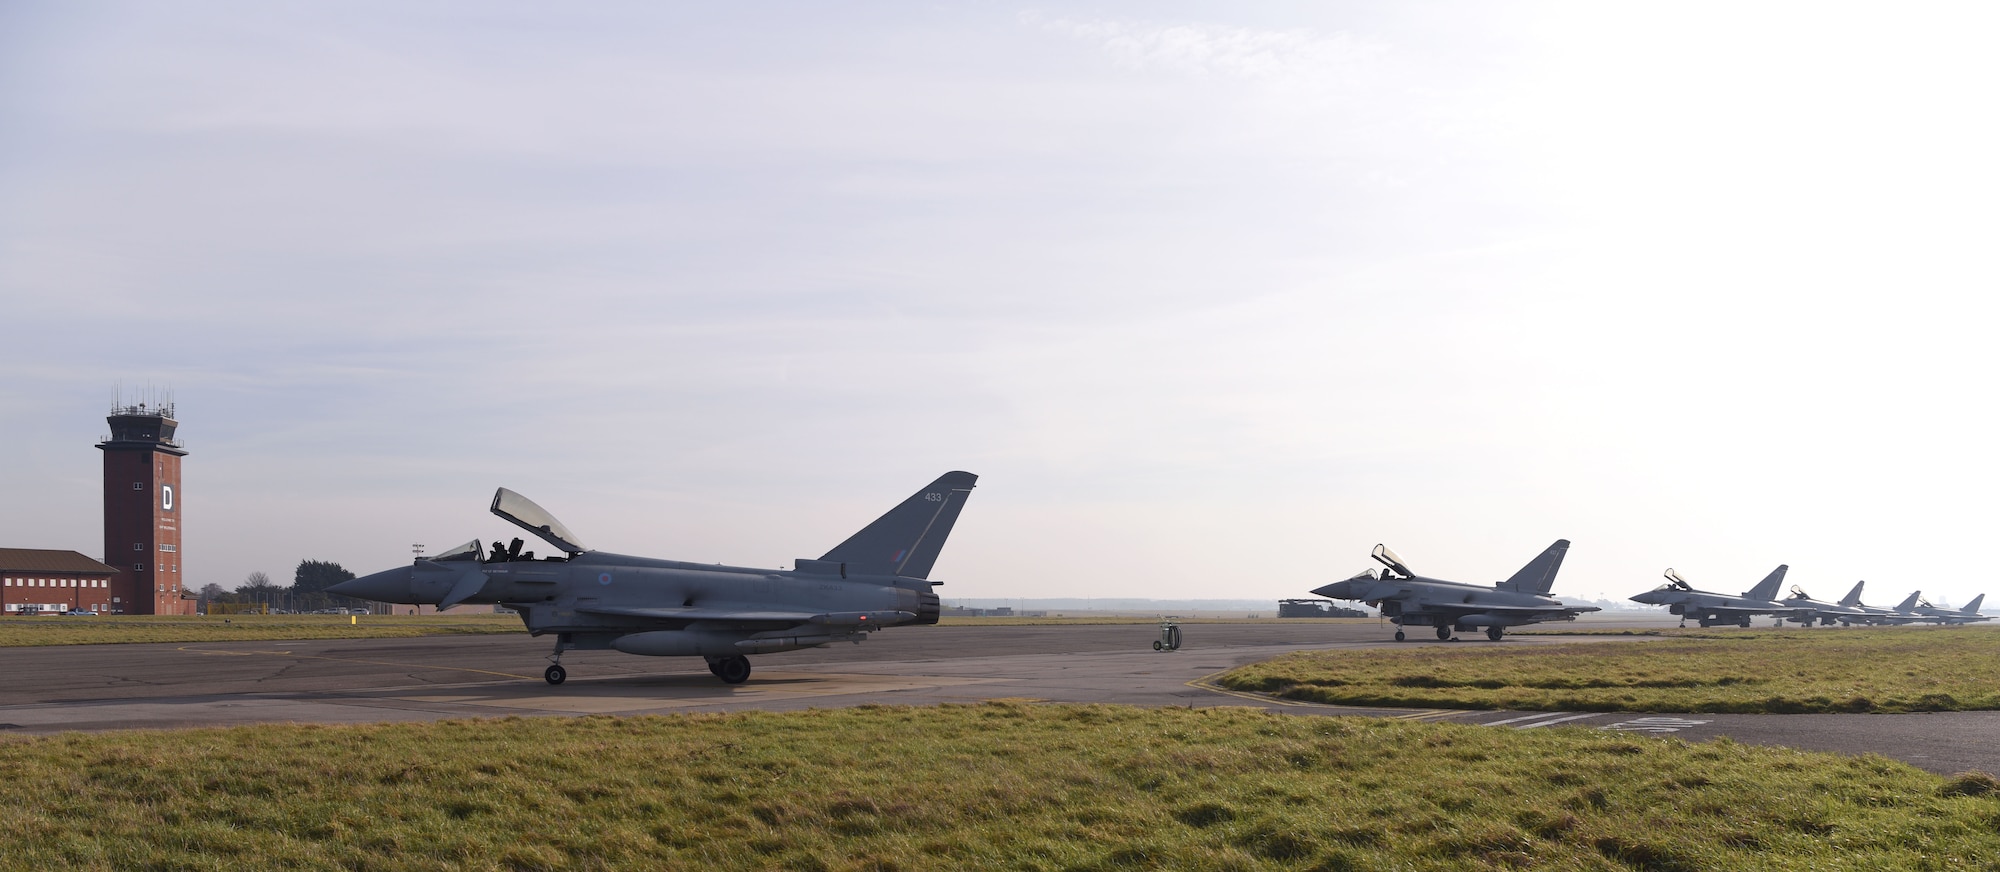 Royal Air Force Eurofighter Typhoons sit on the taxiway at Royal Air Force Mildenhall, England, Feb. 15, 2023. The aircraft, from RAF Coningsby, England, diverted here due to bad weather. The Typhoon is a highly capable and extremely agile multi-role combat aircraft, capable of being deployed for the full spectrum of air operations, including air policing, peace support and high-intensity conflict. (U.S. Air Force photo by Karen Abeyasekere)